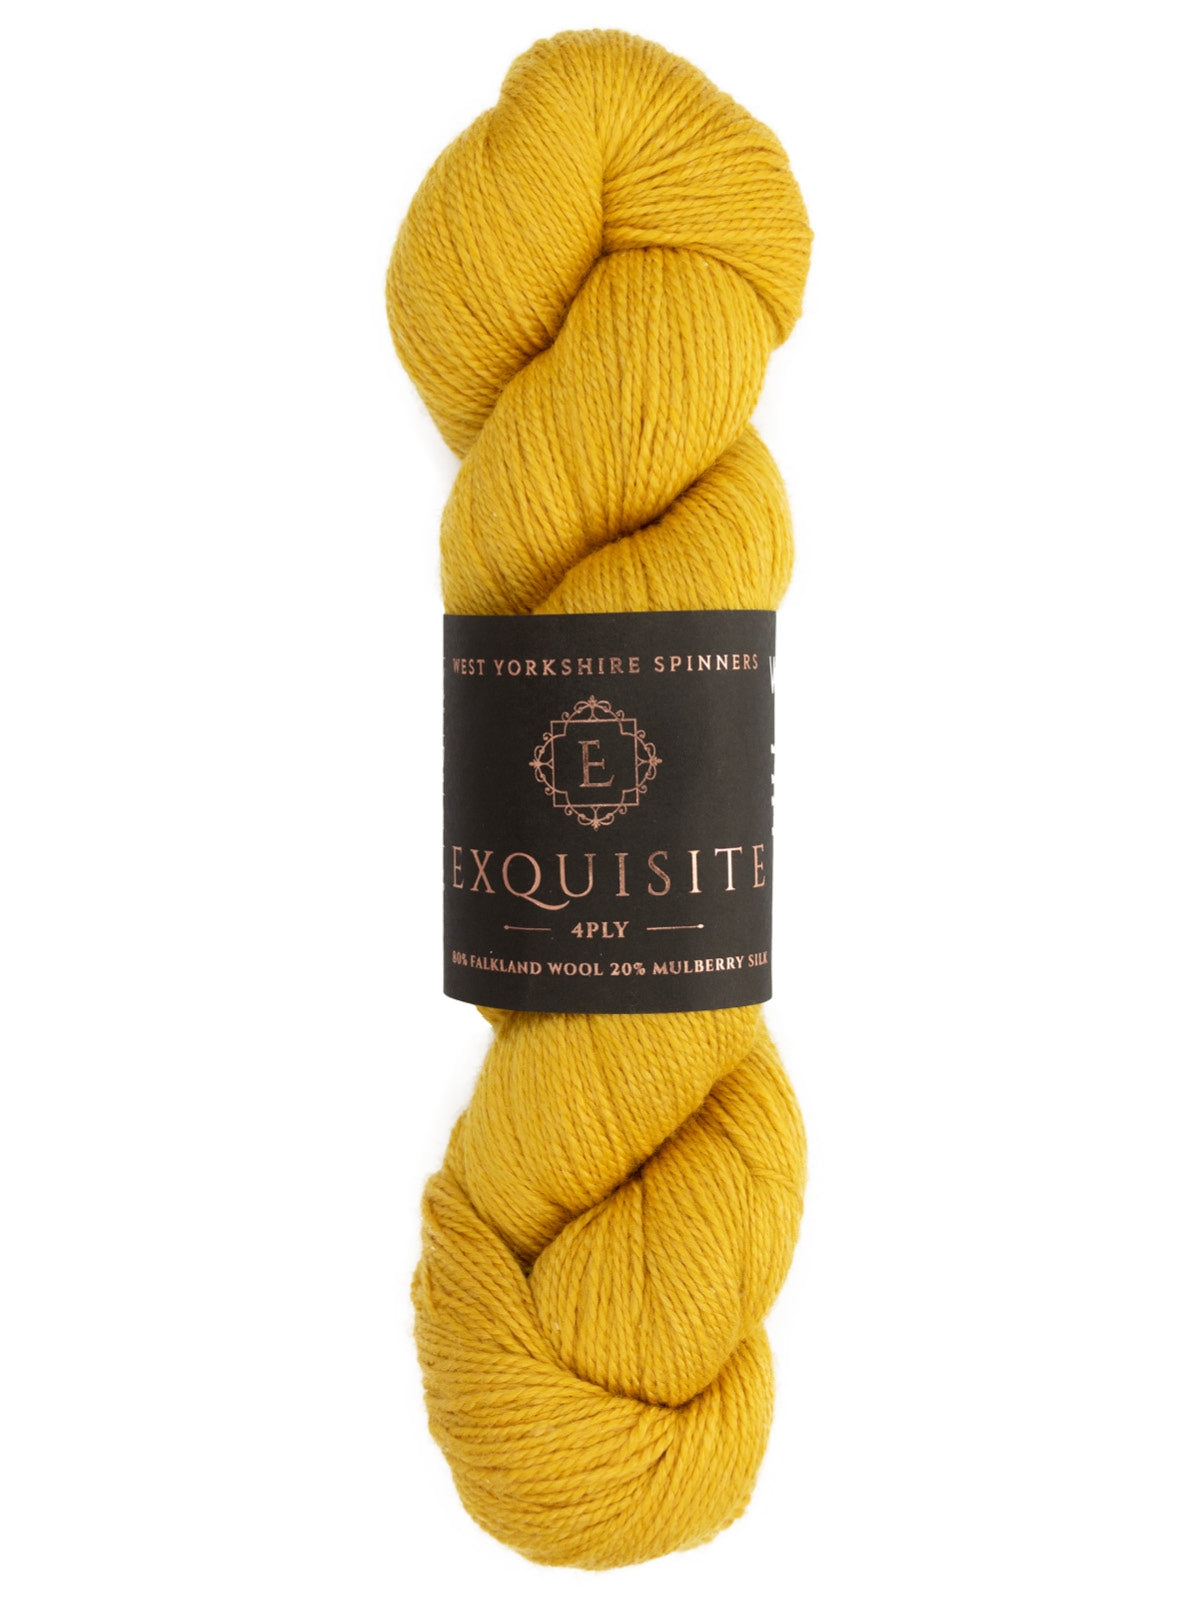 West Yorkshire Spinners Exquiste 4 ply Fingering yarn color yellow